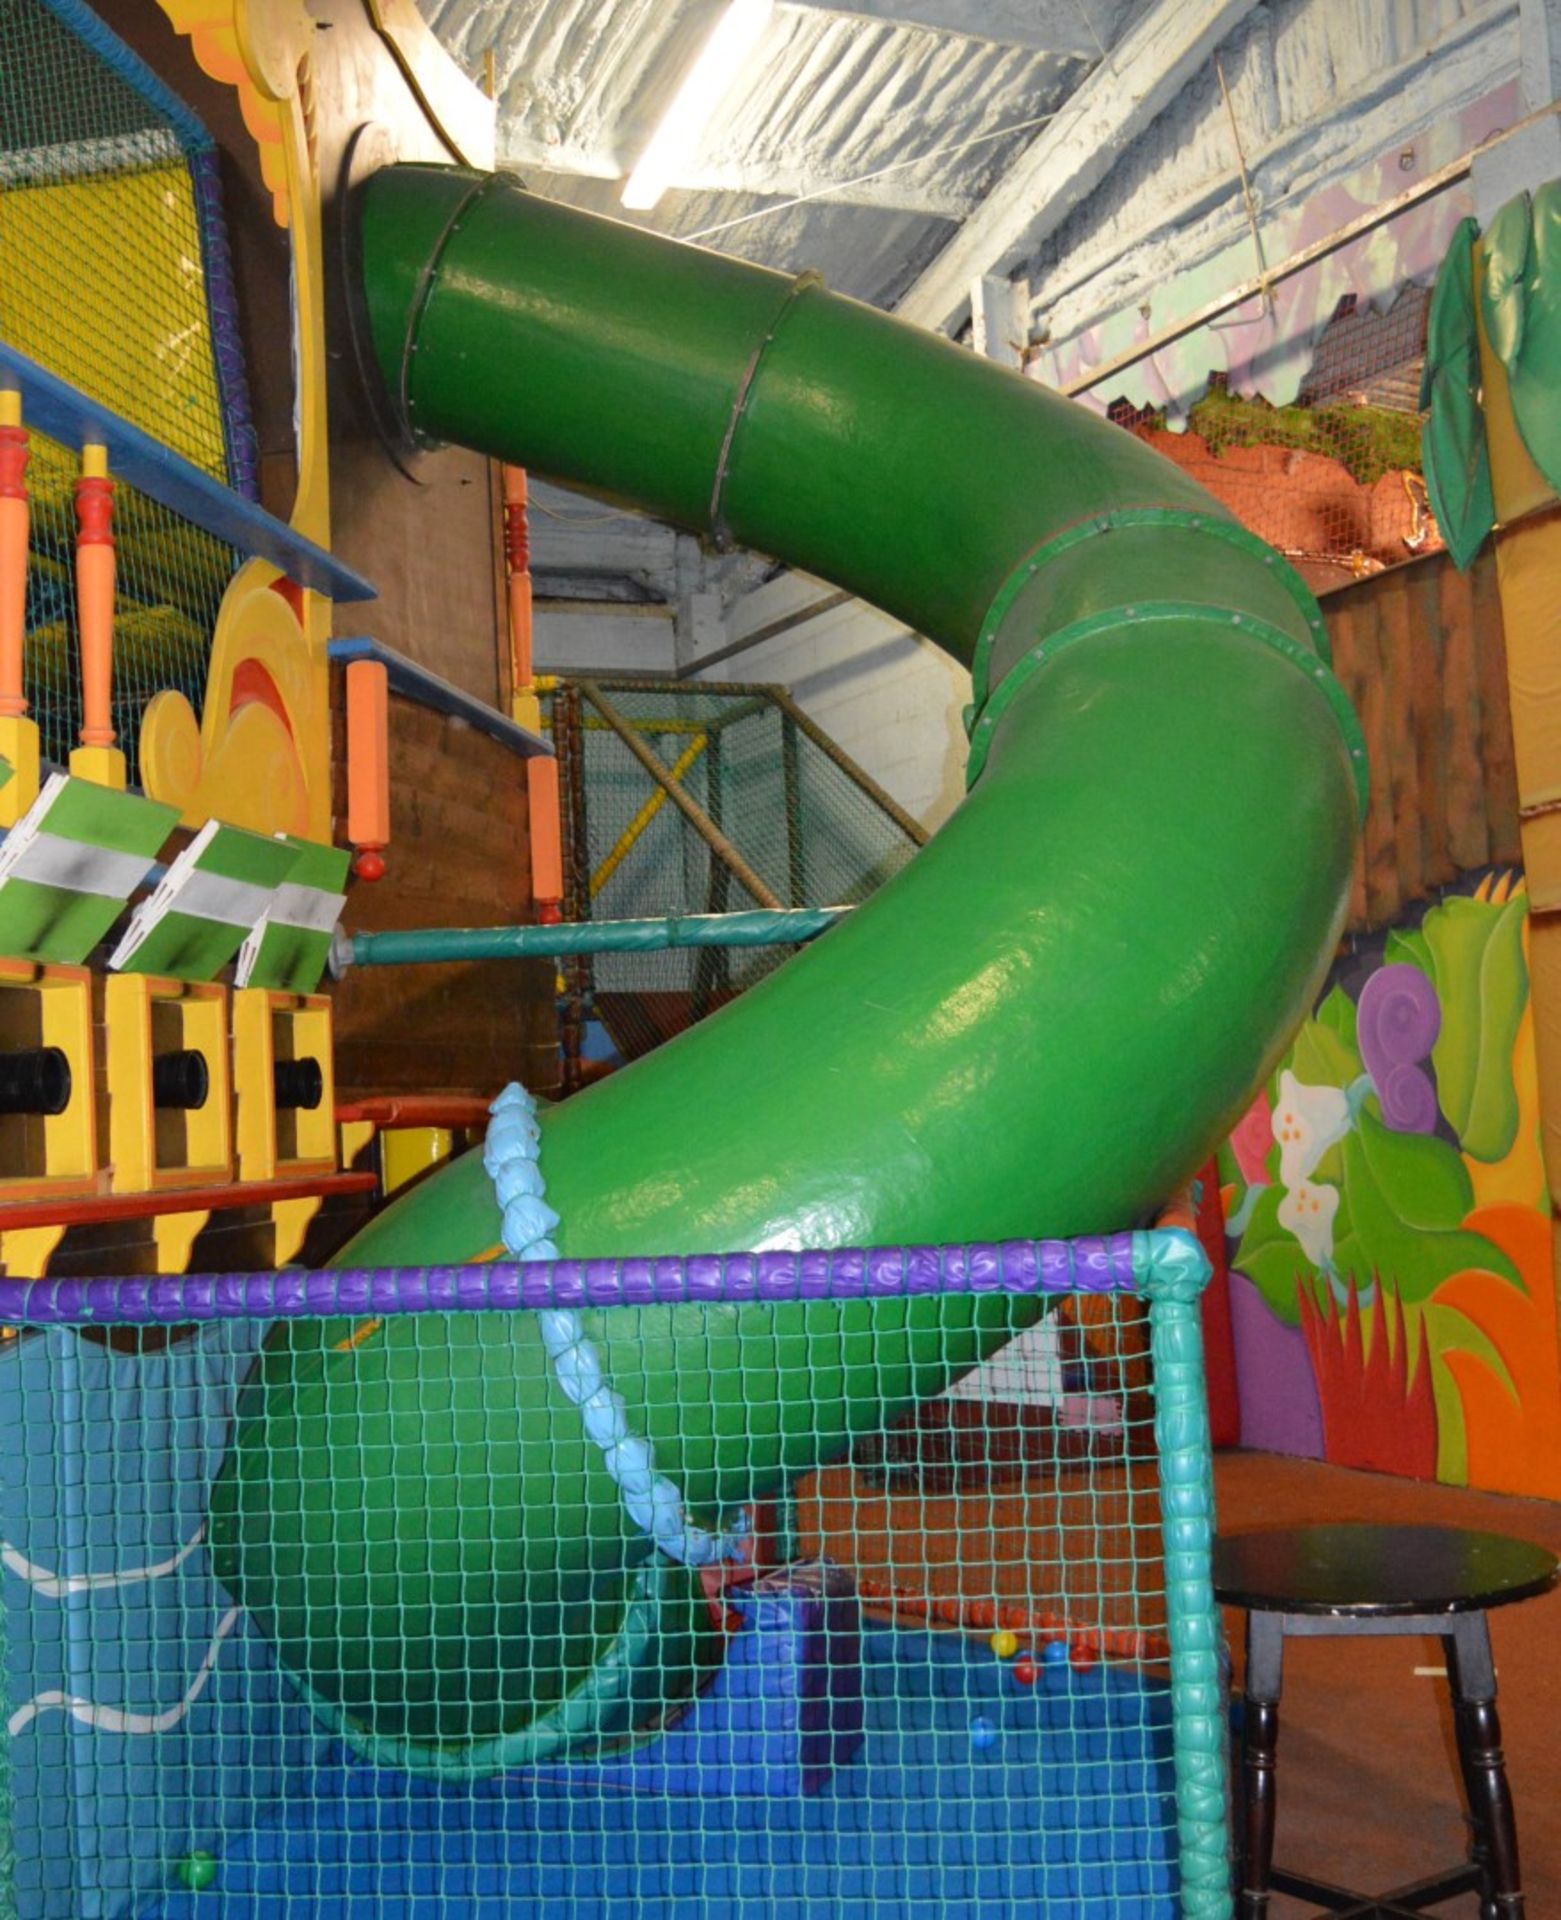 1 x Childrens Playcentre Tunnel Tube Slide in Green - Very Good Condition - Ref PTP - CL351 -